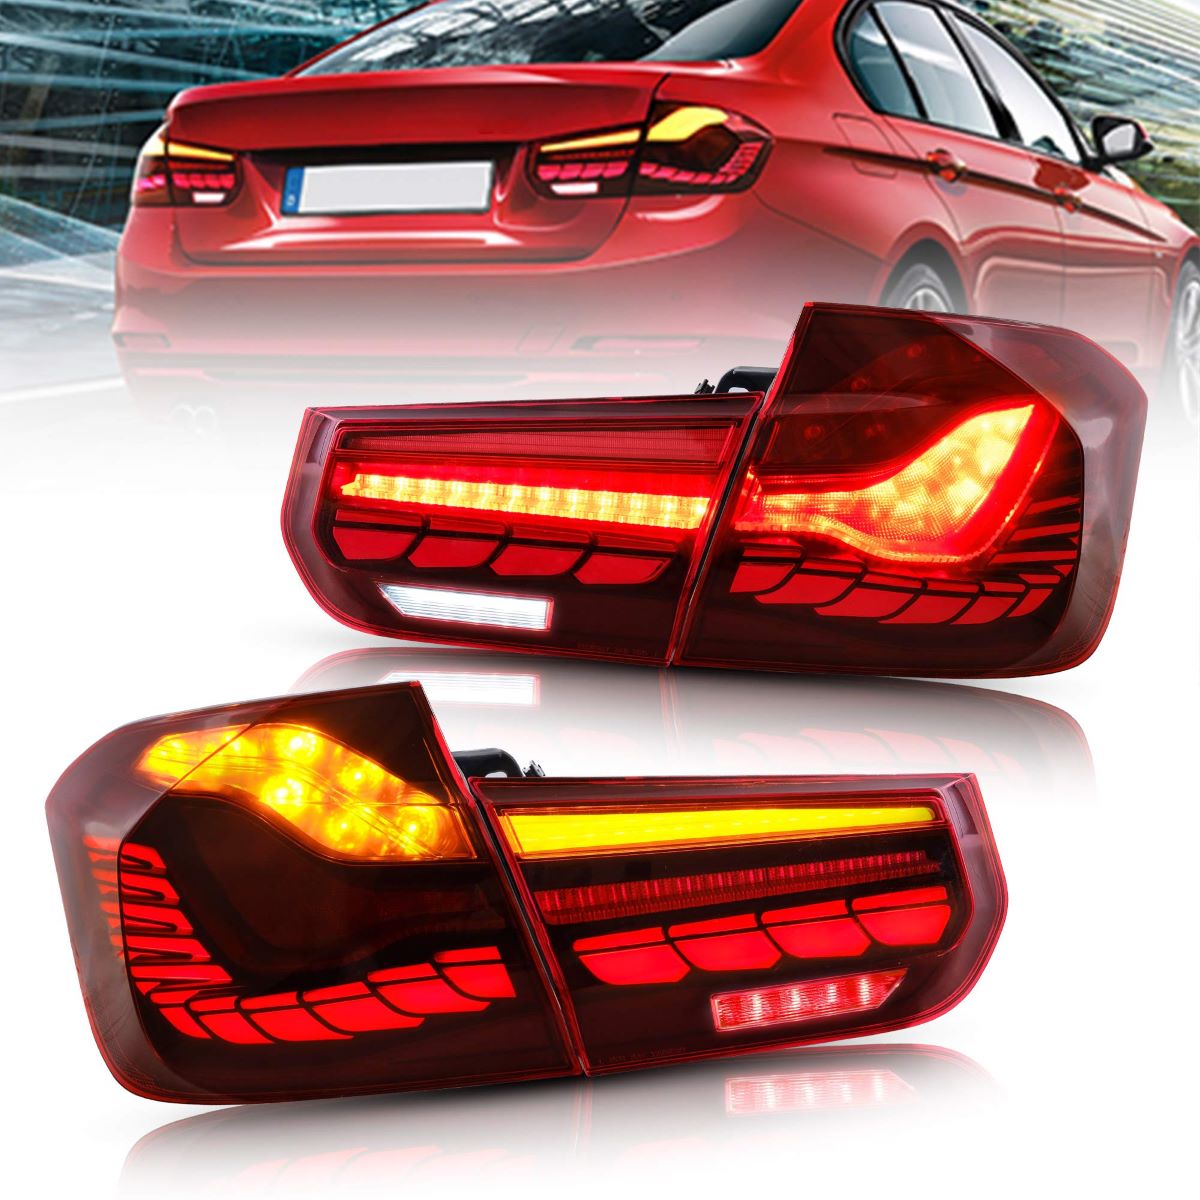 13 Amazing Bmw Tail Light Socket for 2023